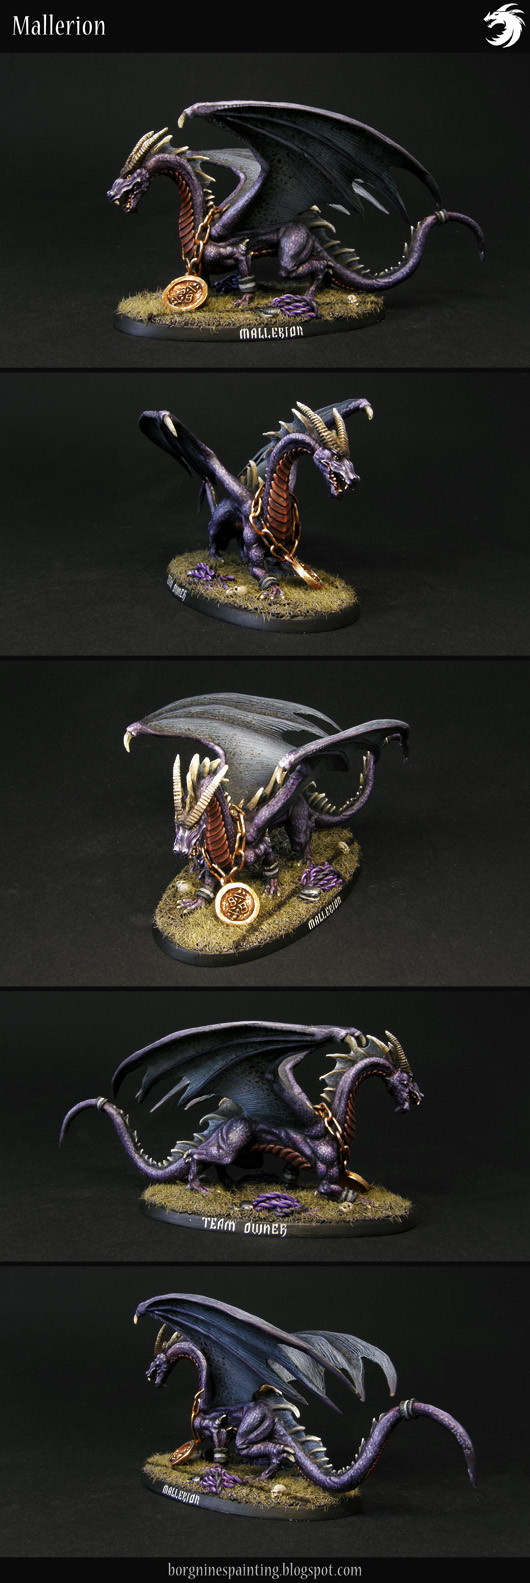 Picture showing a dragon tabletop miniature, a Shadow Dragon from Reaper - with purple scales, reddish underbelly and dark blue wing membranes, standing on an oval base. The dragon has a golden medallion on its neck, bearing the Blood Bowl logo. The miniature is used as a team owner for a Blood Bowl Dark Elf team.